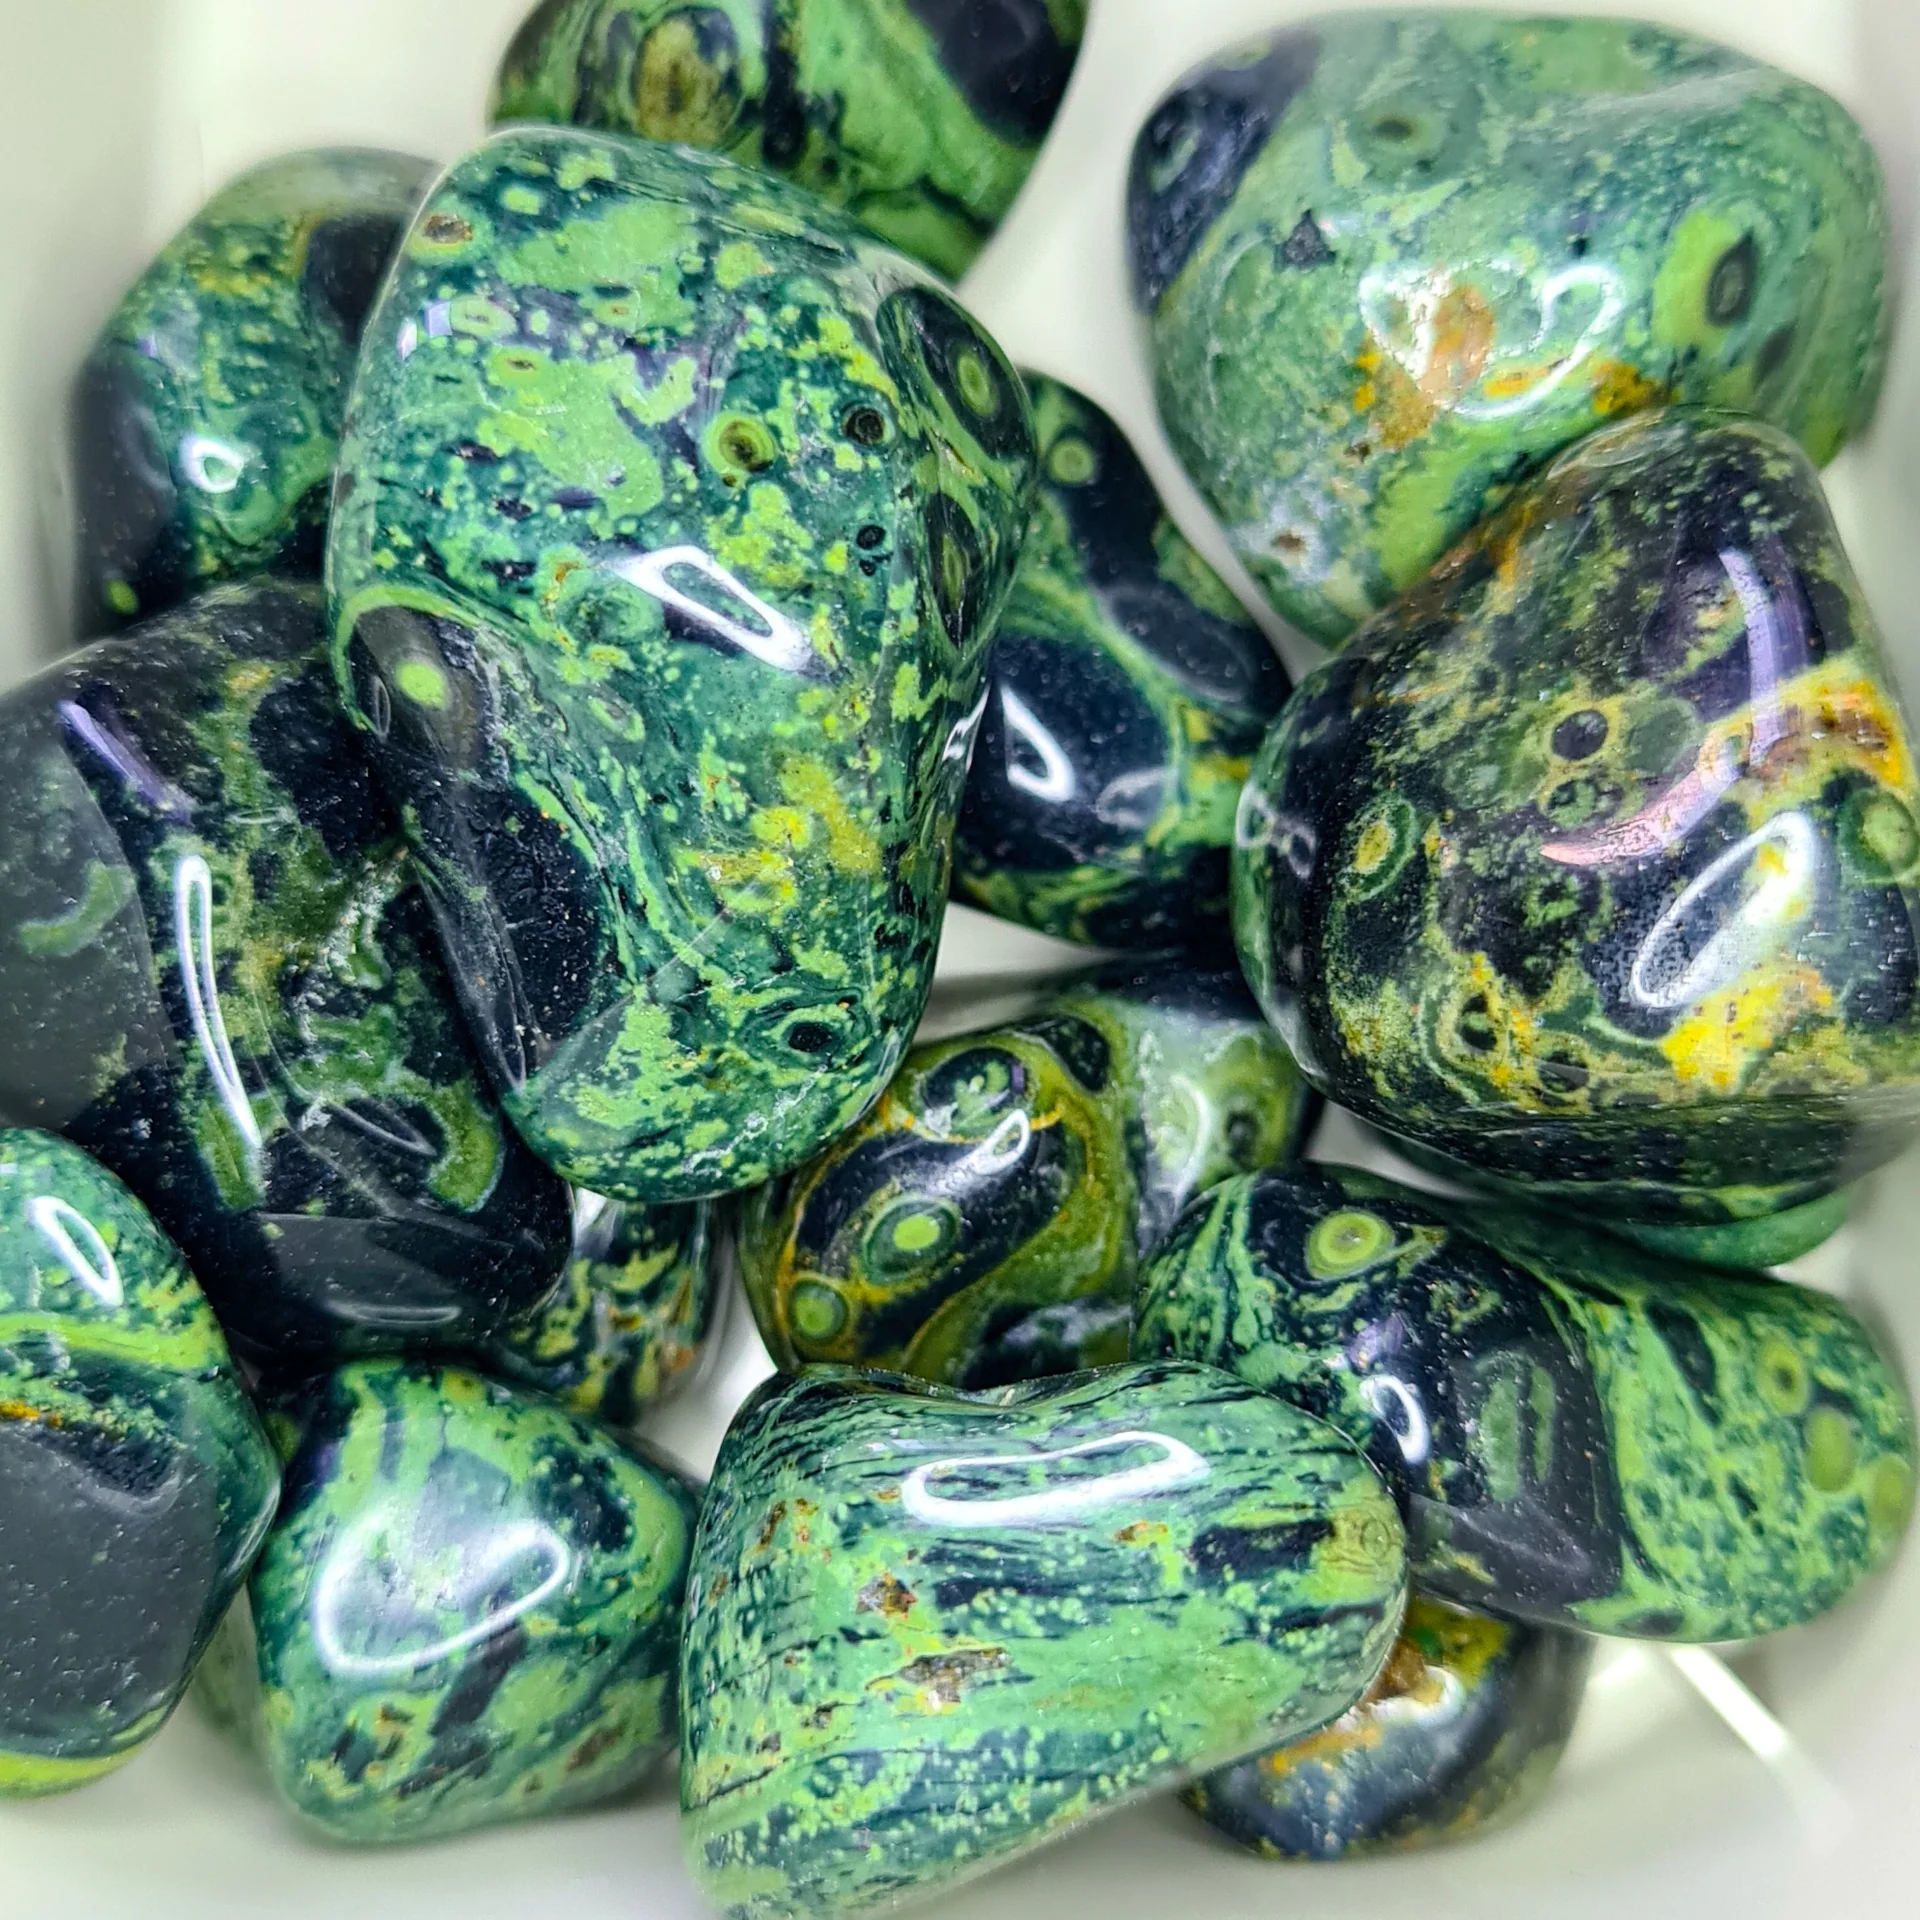 Green jasper is an all-around healer of the body. Learn more about